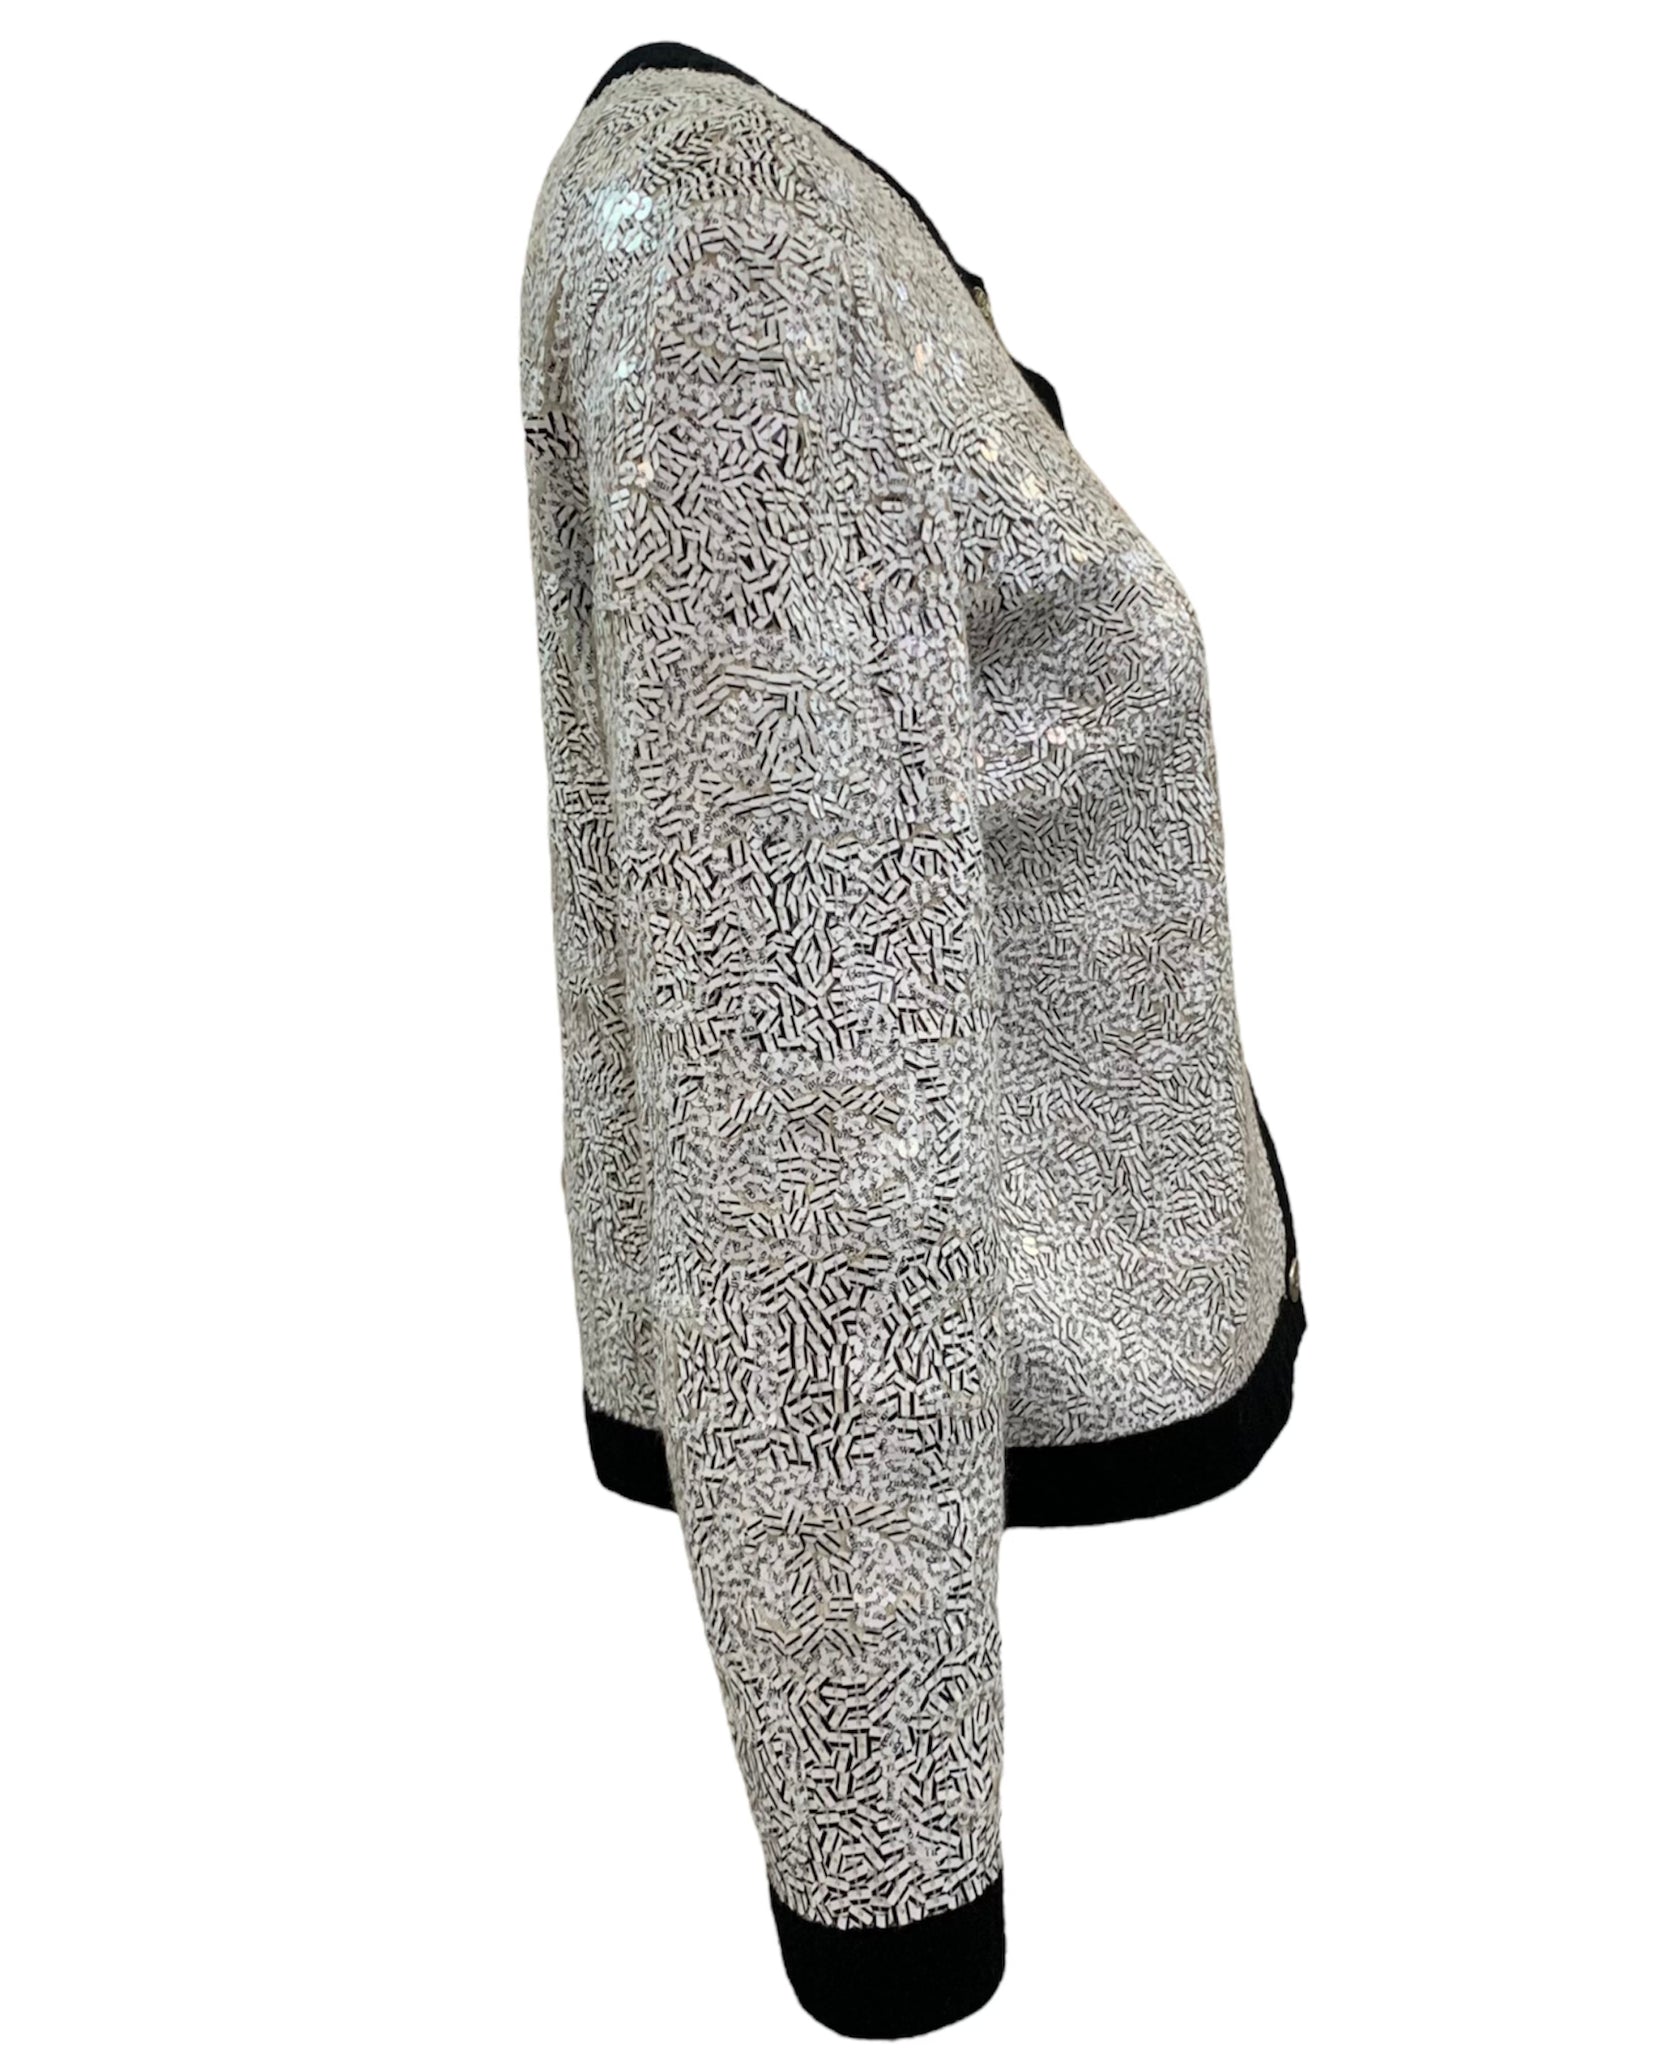 Chanel Contemporary Cashmere Wordy Sequin Cardigan SIDE 2 of 5